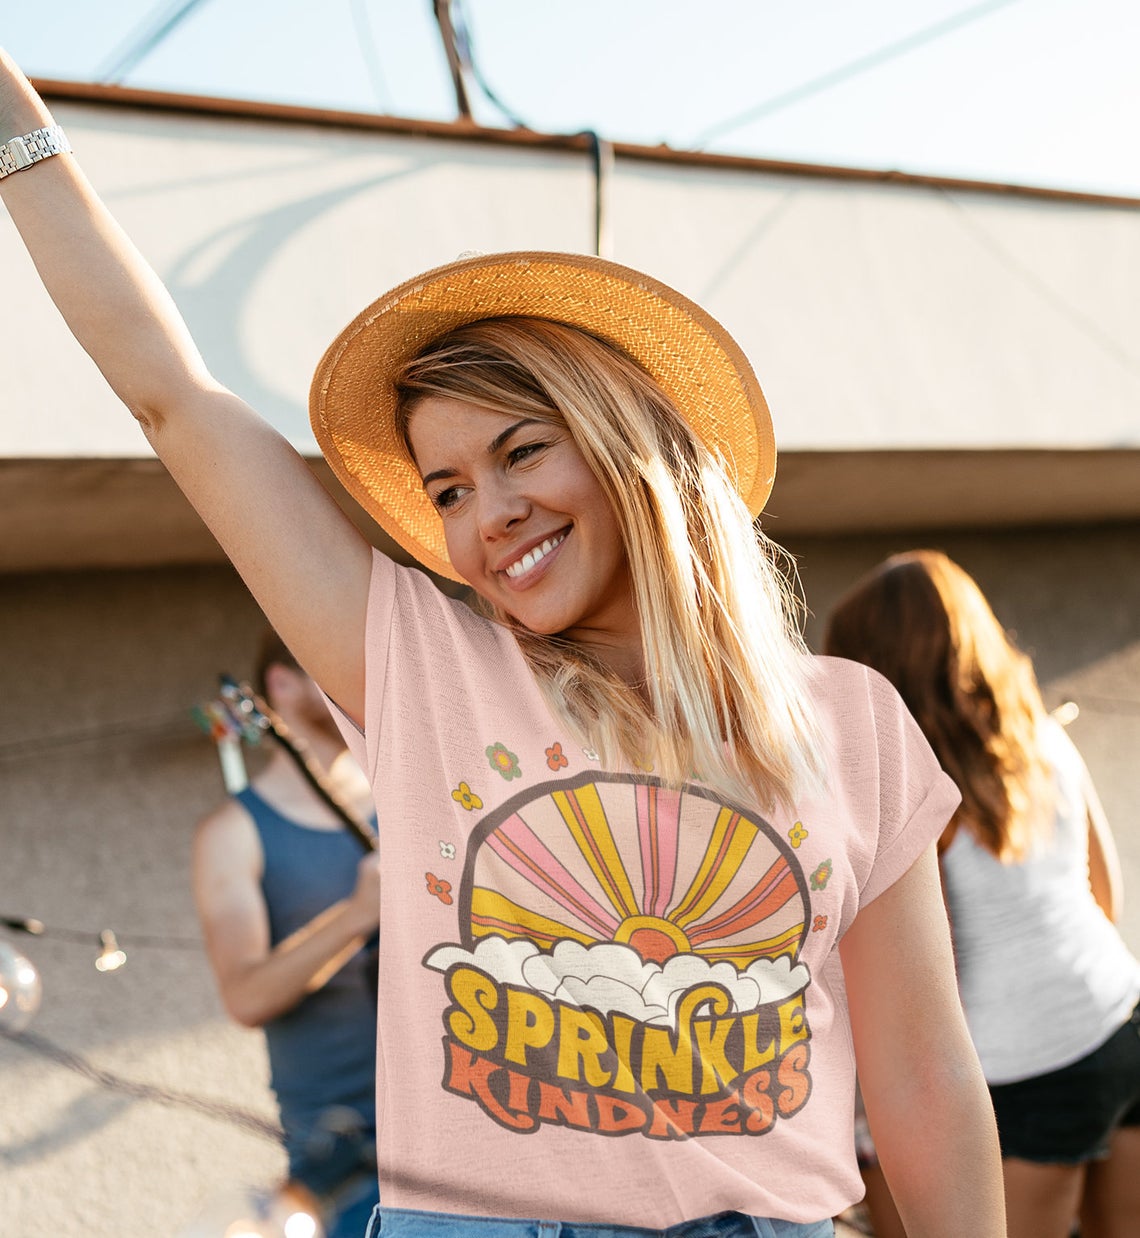 Sprinkle Kindness - Retro Vibes Softstyle Bella Tee / Fun Hippie Vibes Tee/ Youth and Adult Sizing Available